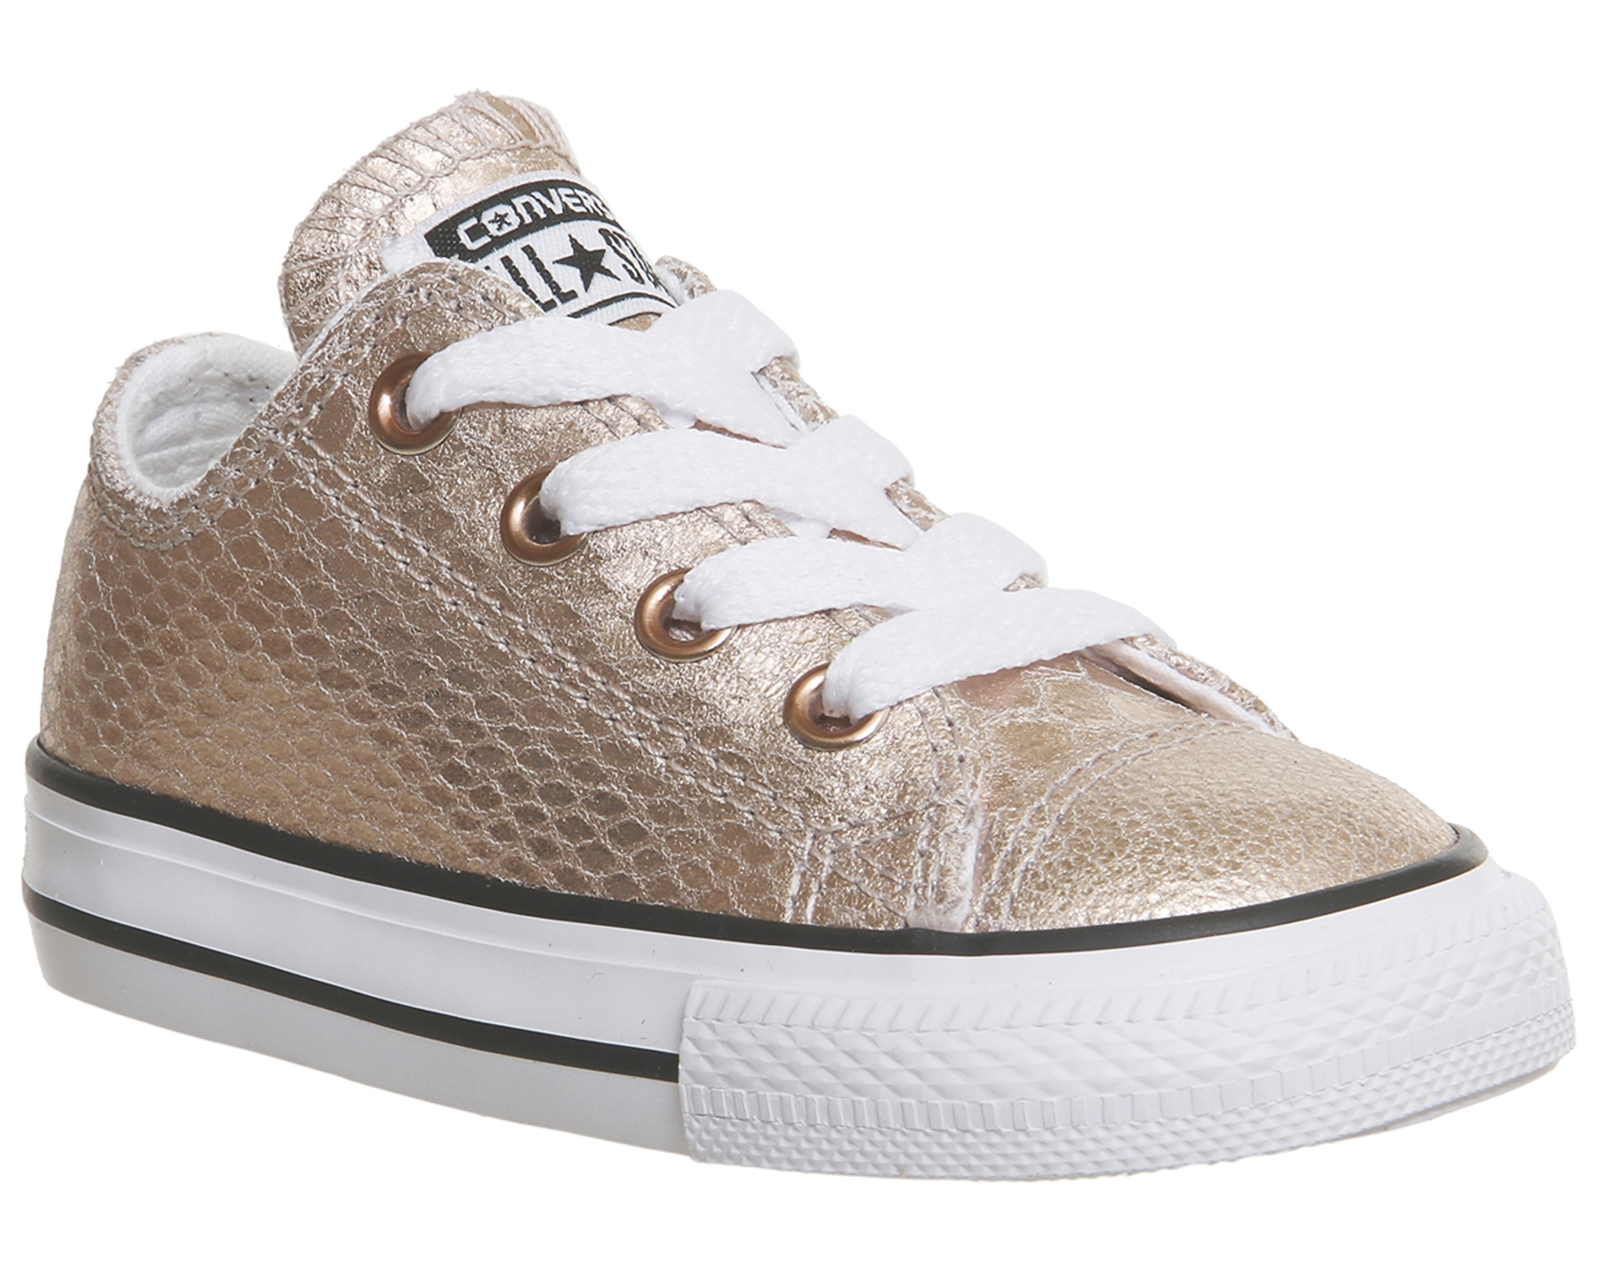 converse metallic rose gold Cheaper Than Retail Price> Buy Clothing,  Accessories and lifestyle products for women & men -